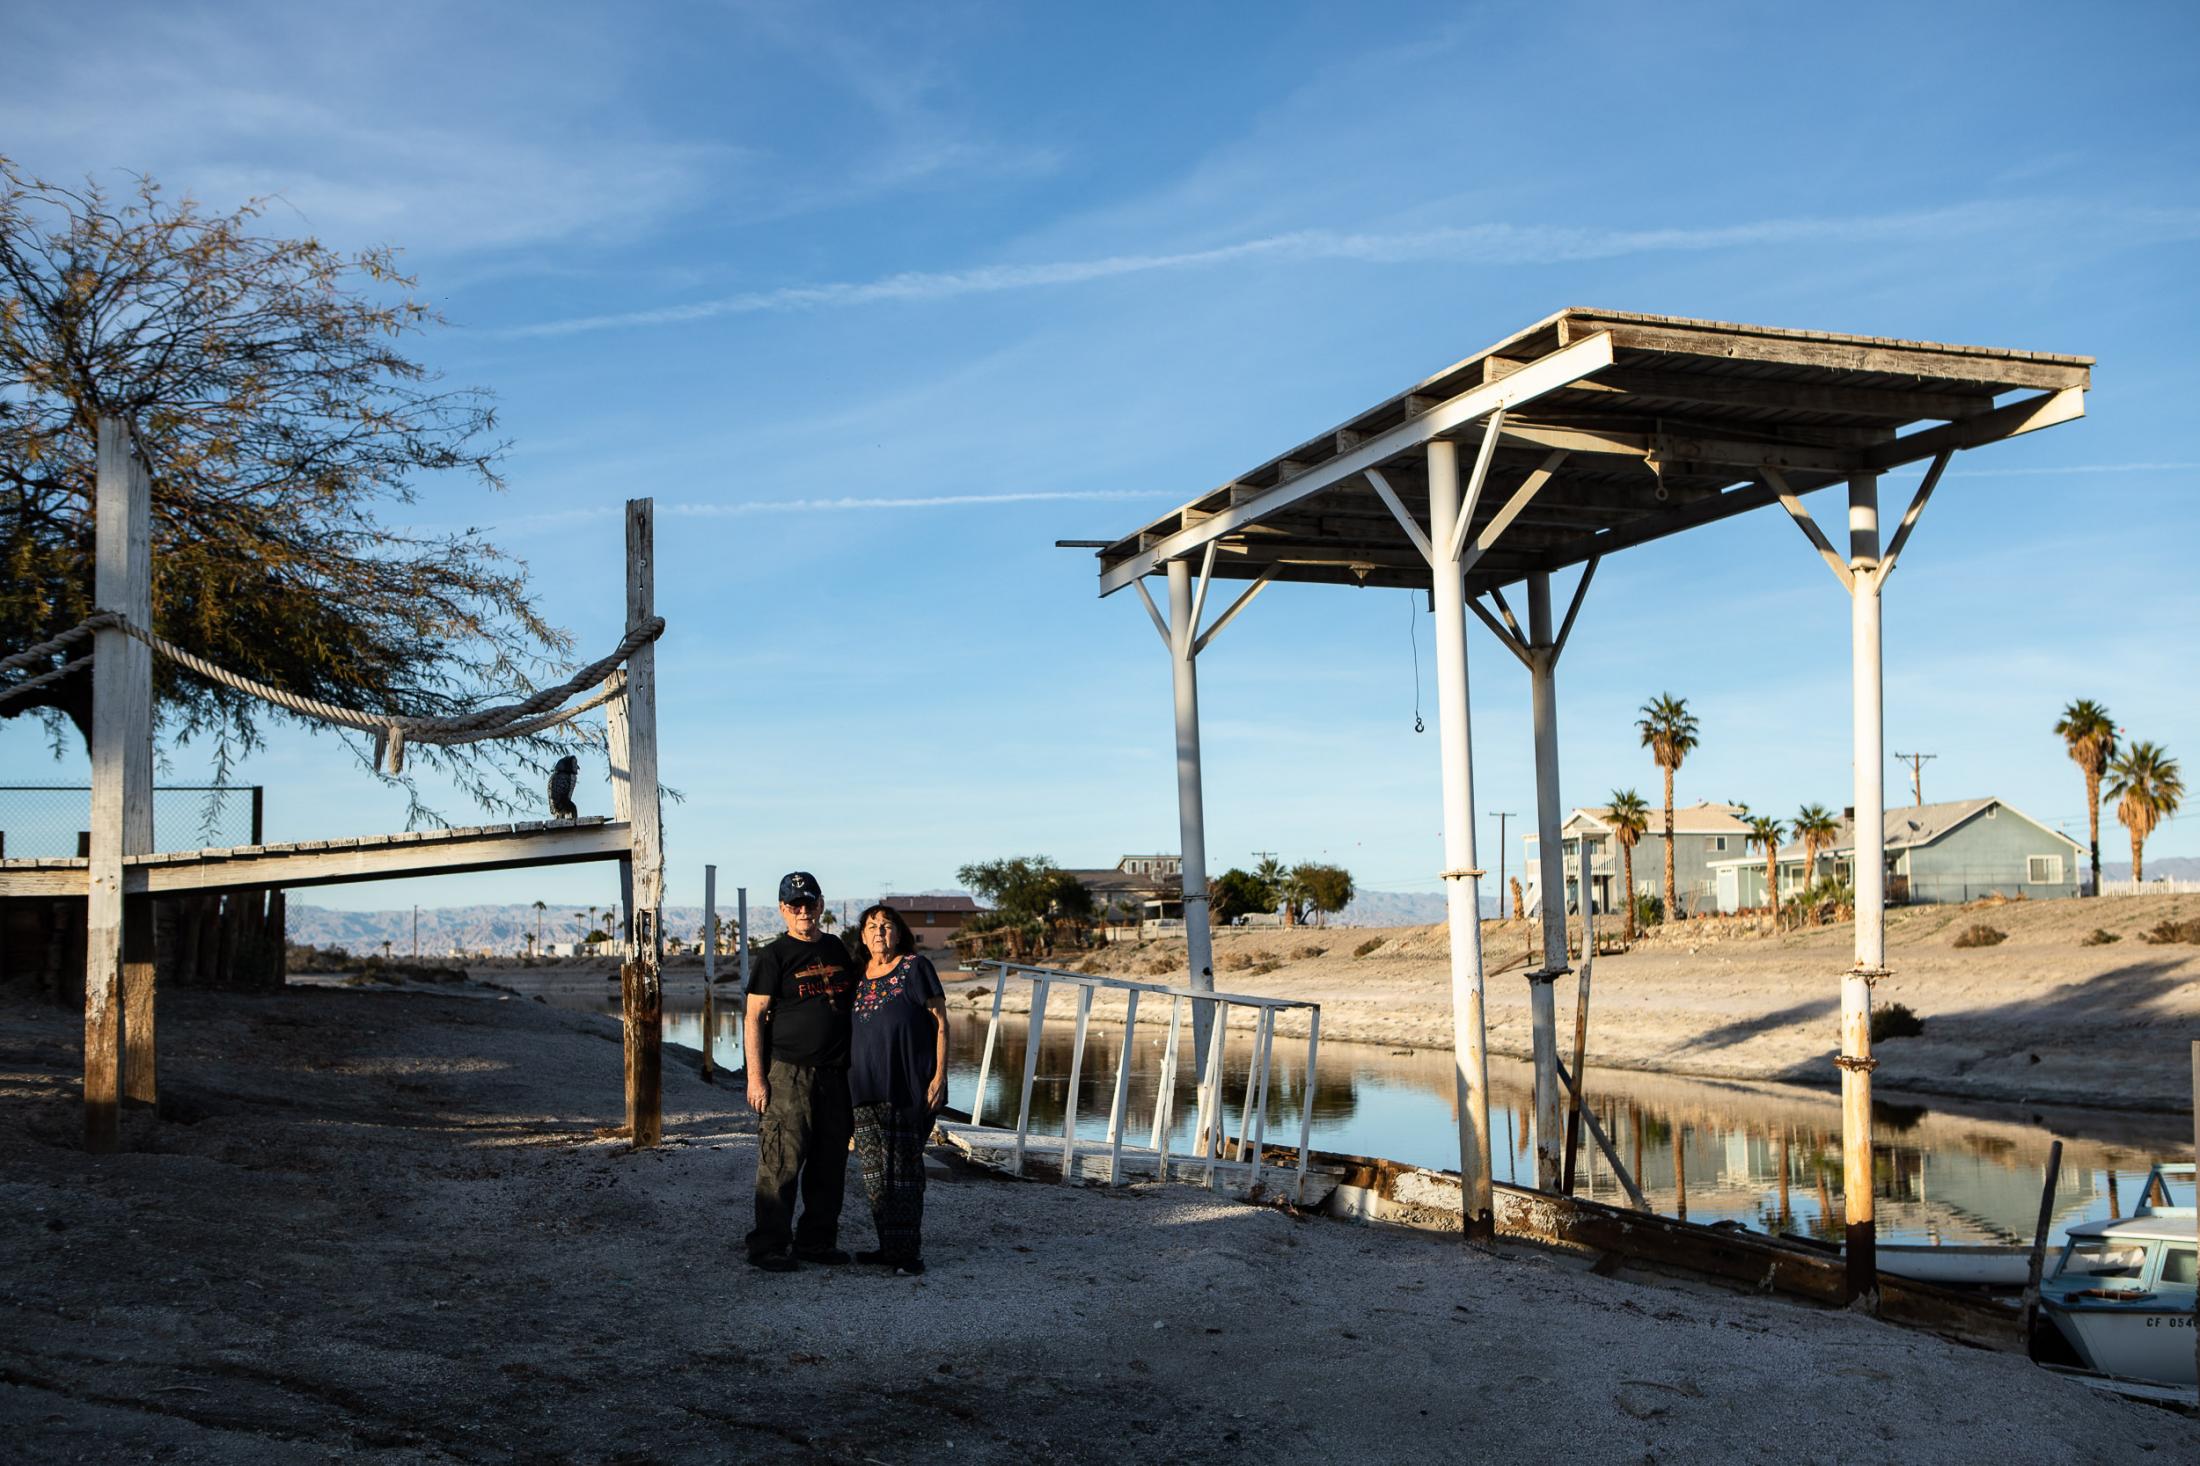  - The Salton Sea -  The canal water behind John and Donna used to reach...